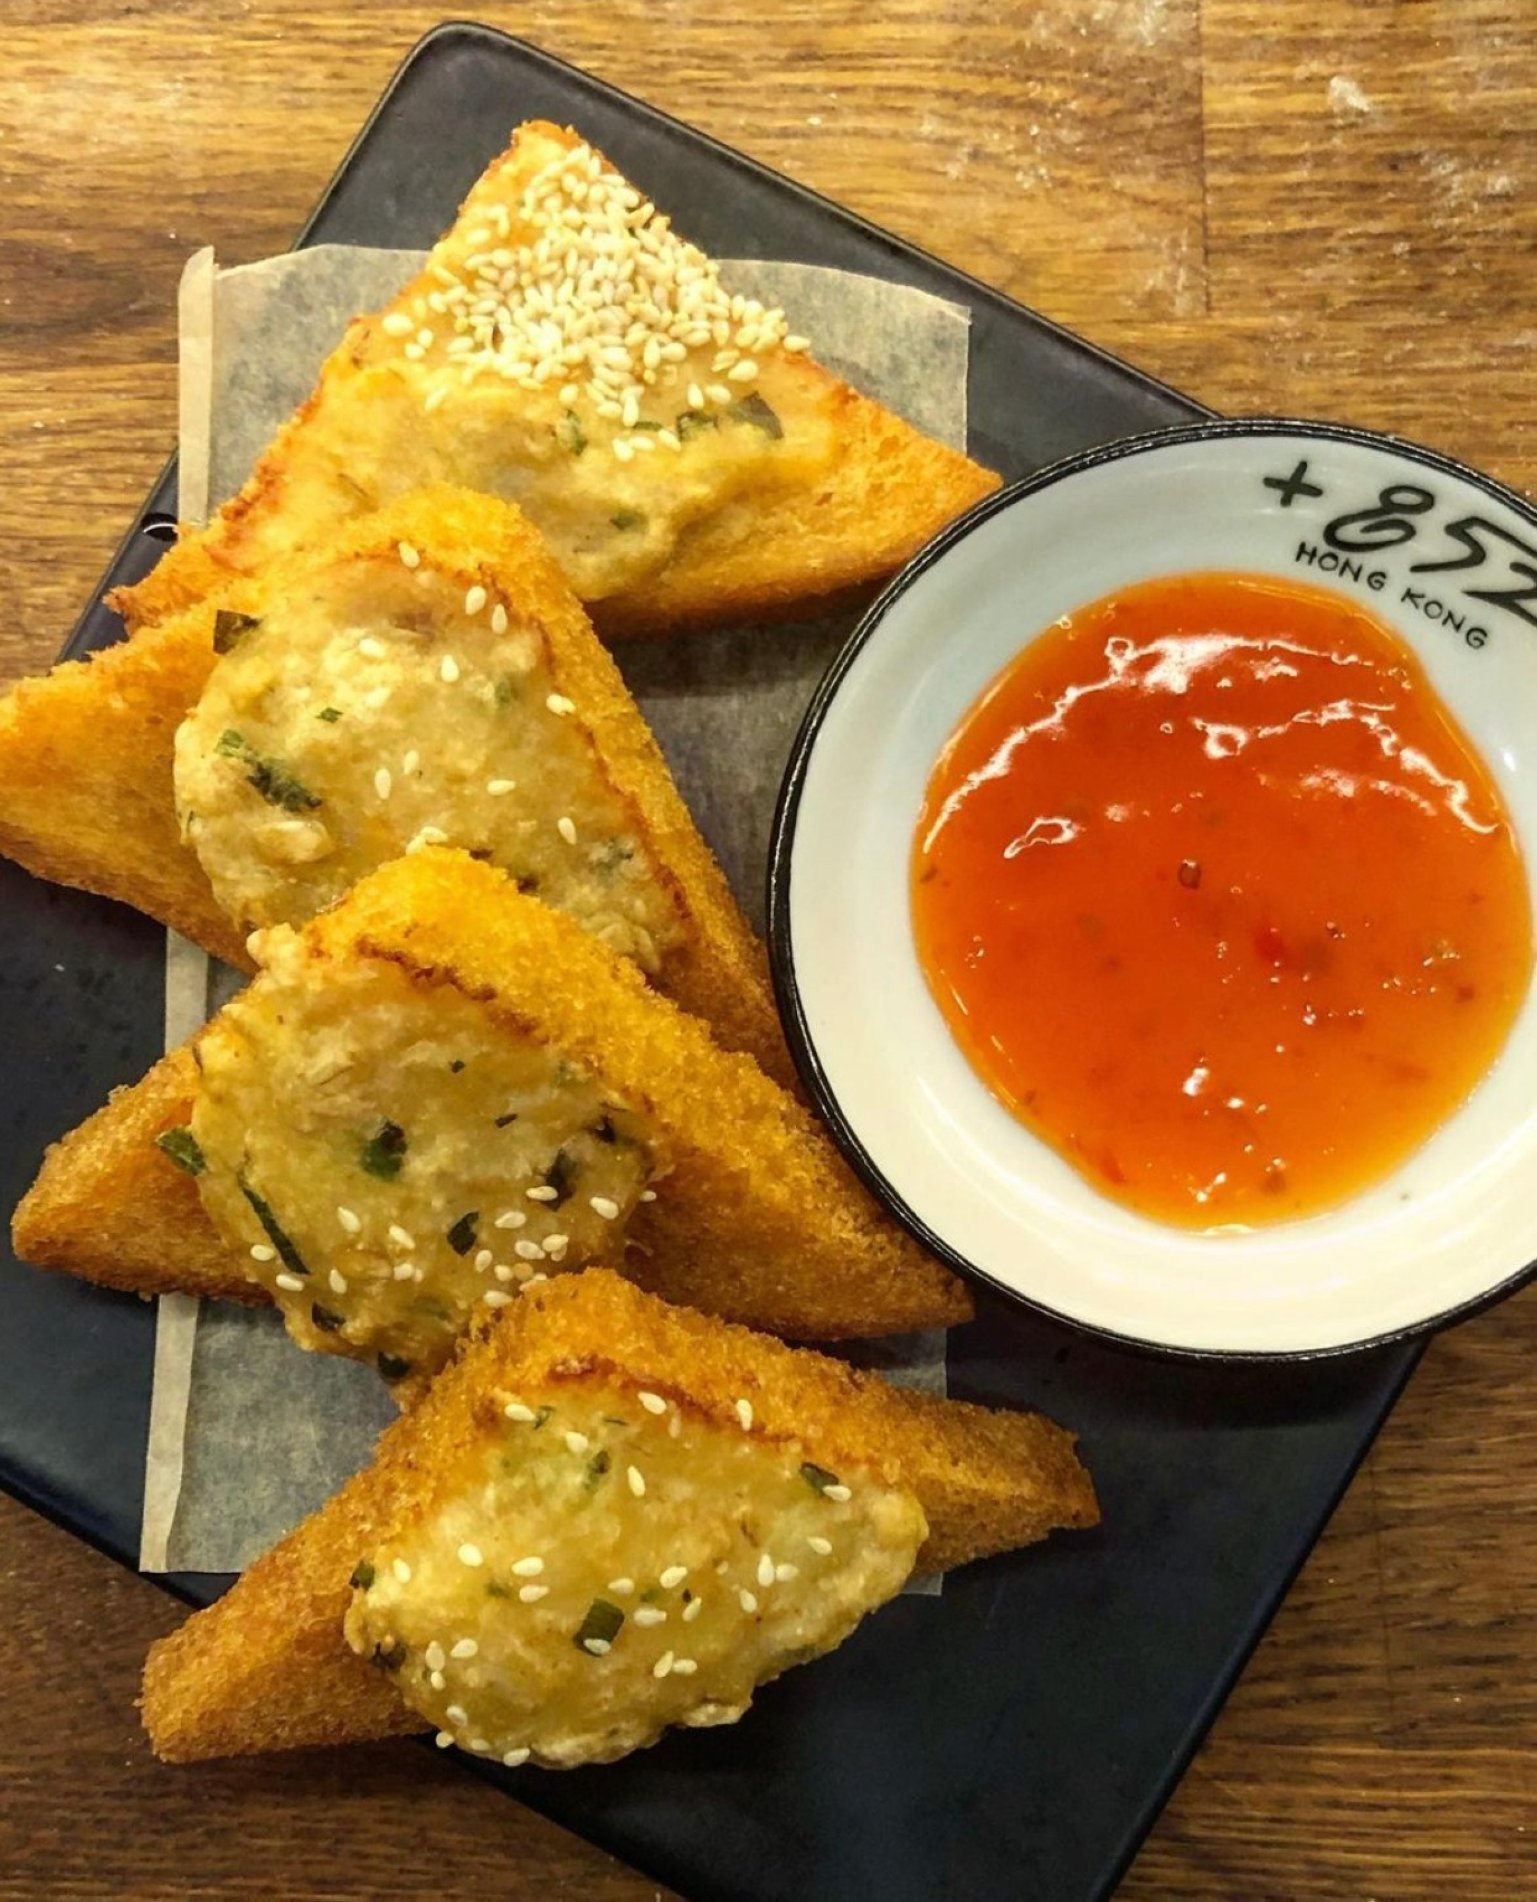 Prawn toast is an old Chinese dim sum dish.  (Courtesy of 852 Hong Kong Cafe Restaurant) 